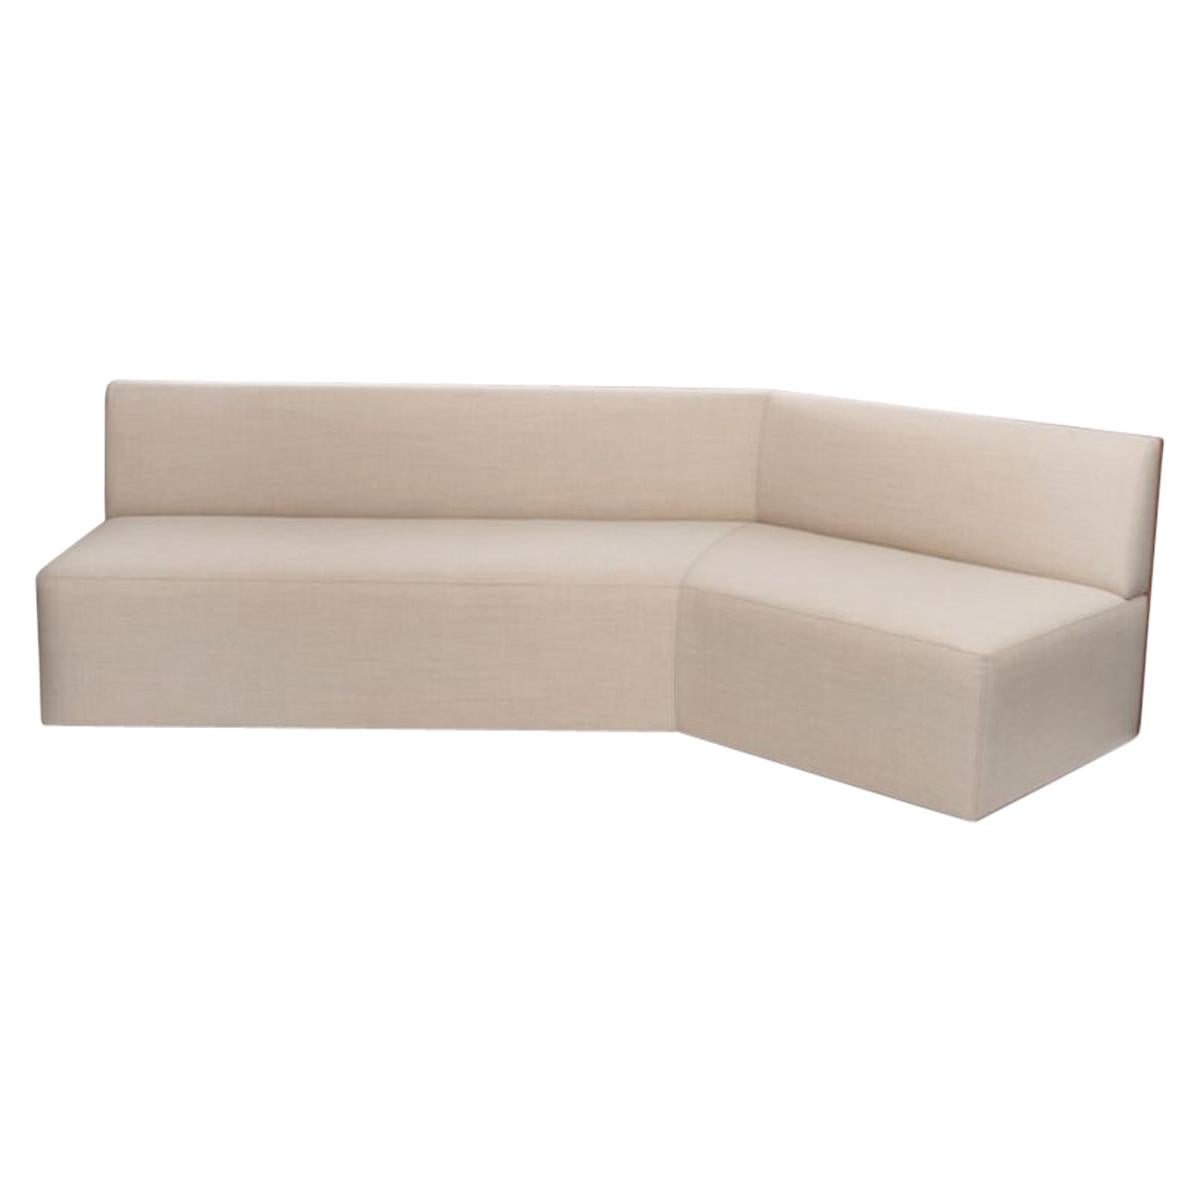 Banquette Bench by Plumbum For Sale